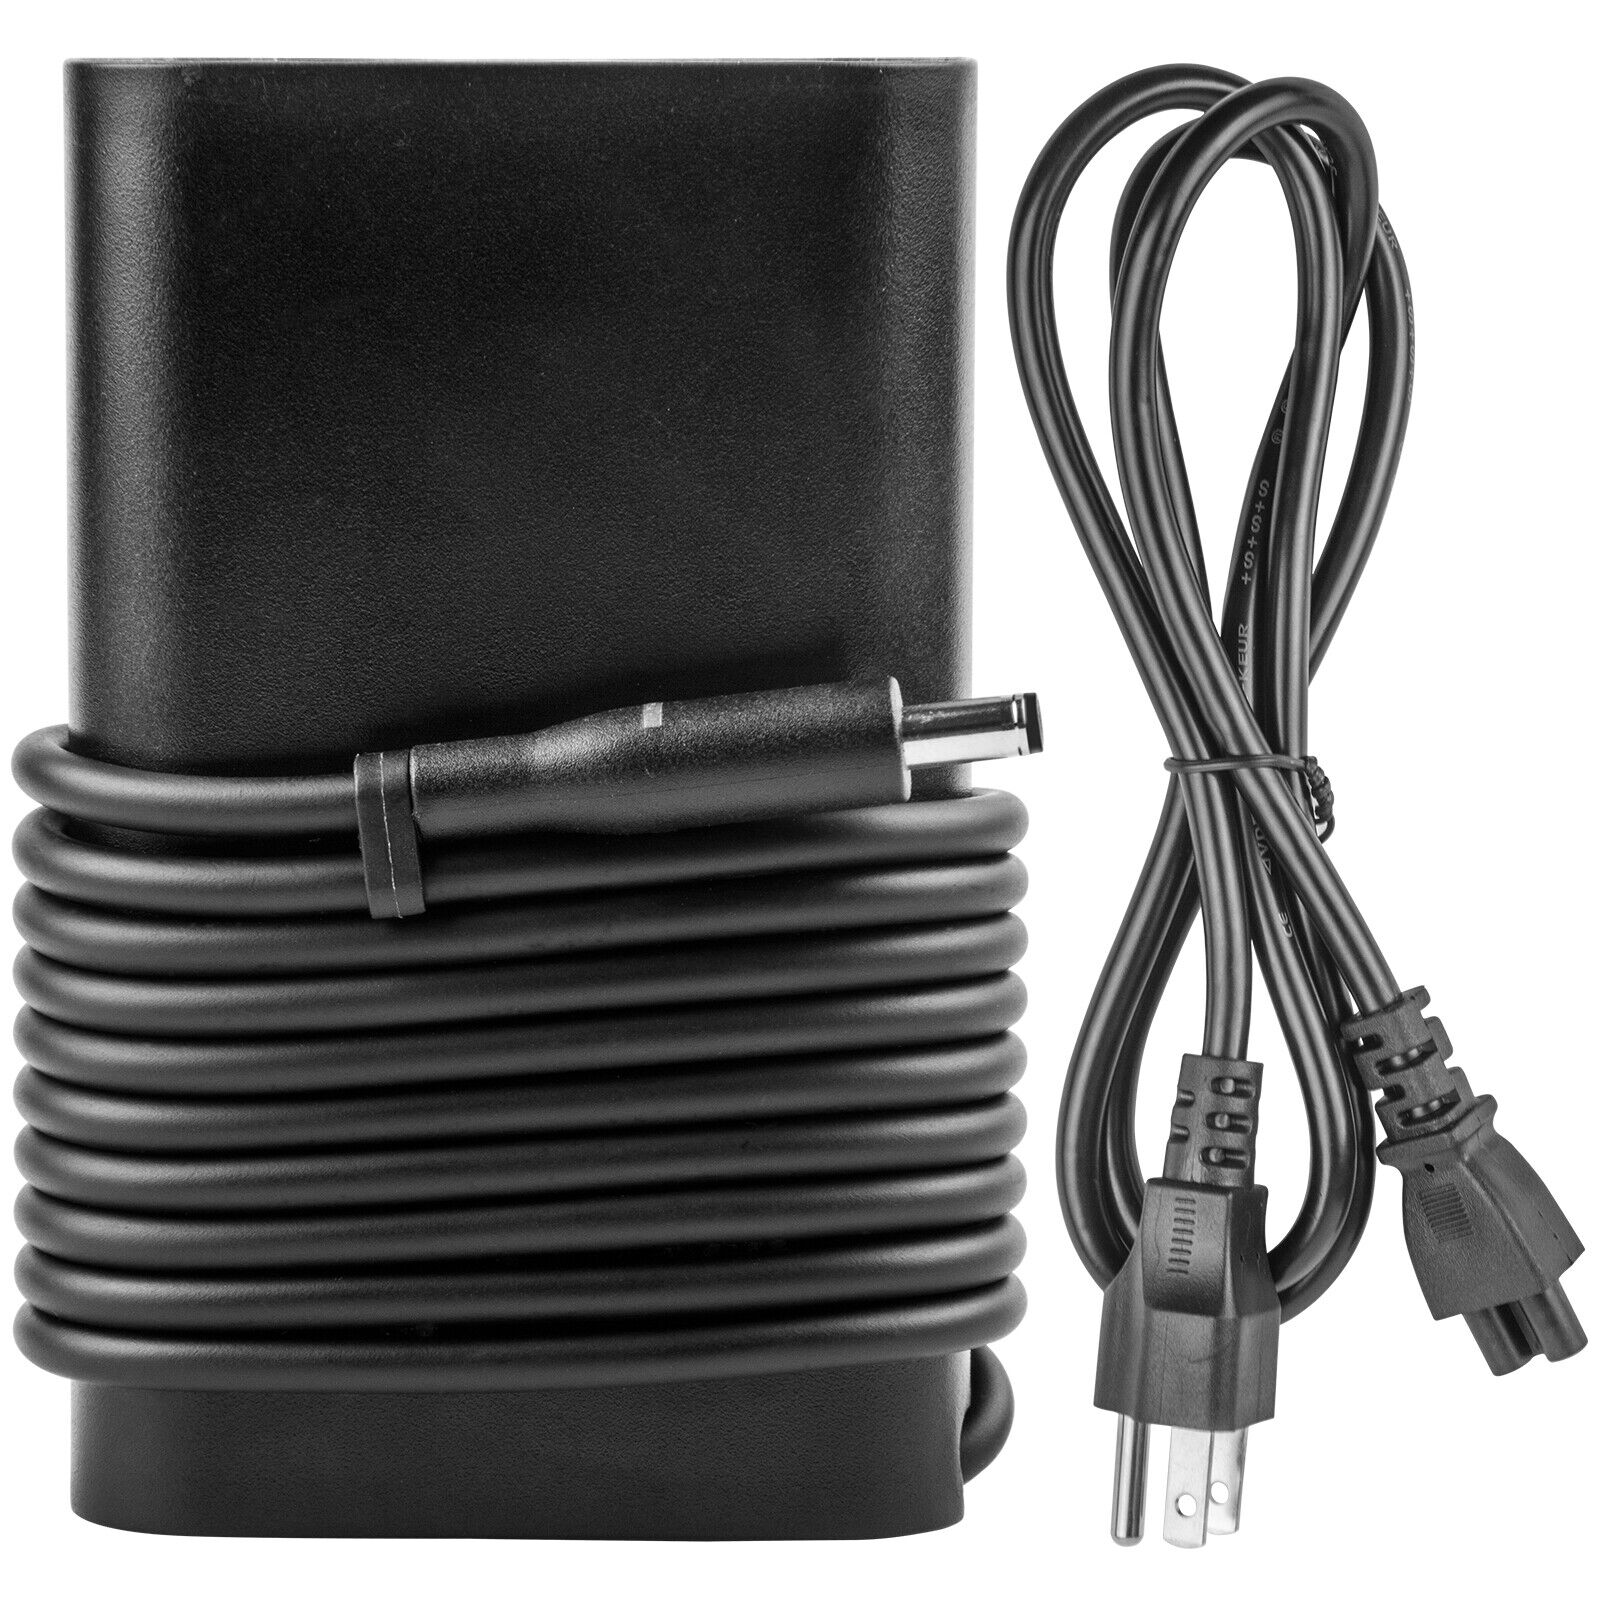 For Dell 19.5V 3.34A 65W 4.5mm Barrel AC Adapter Laptop Charger Power Supply